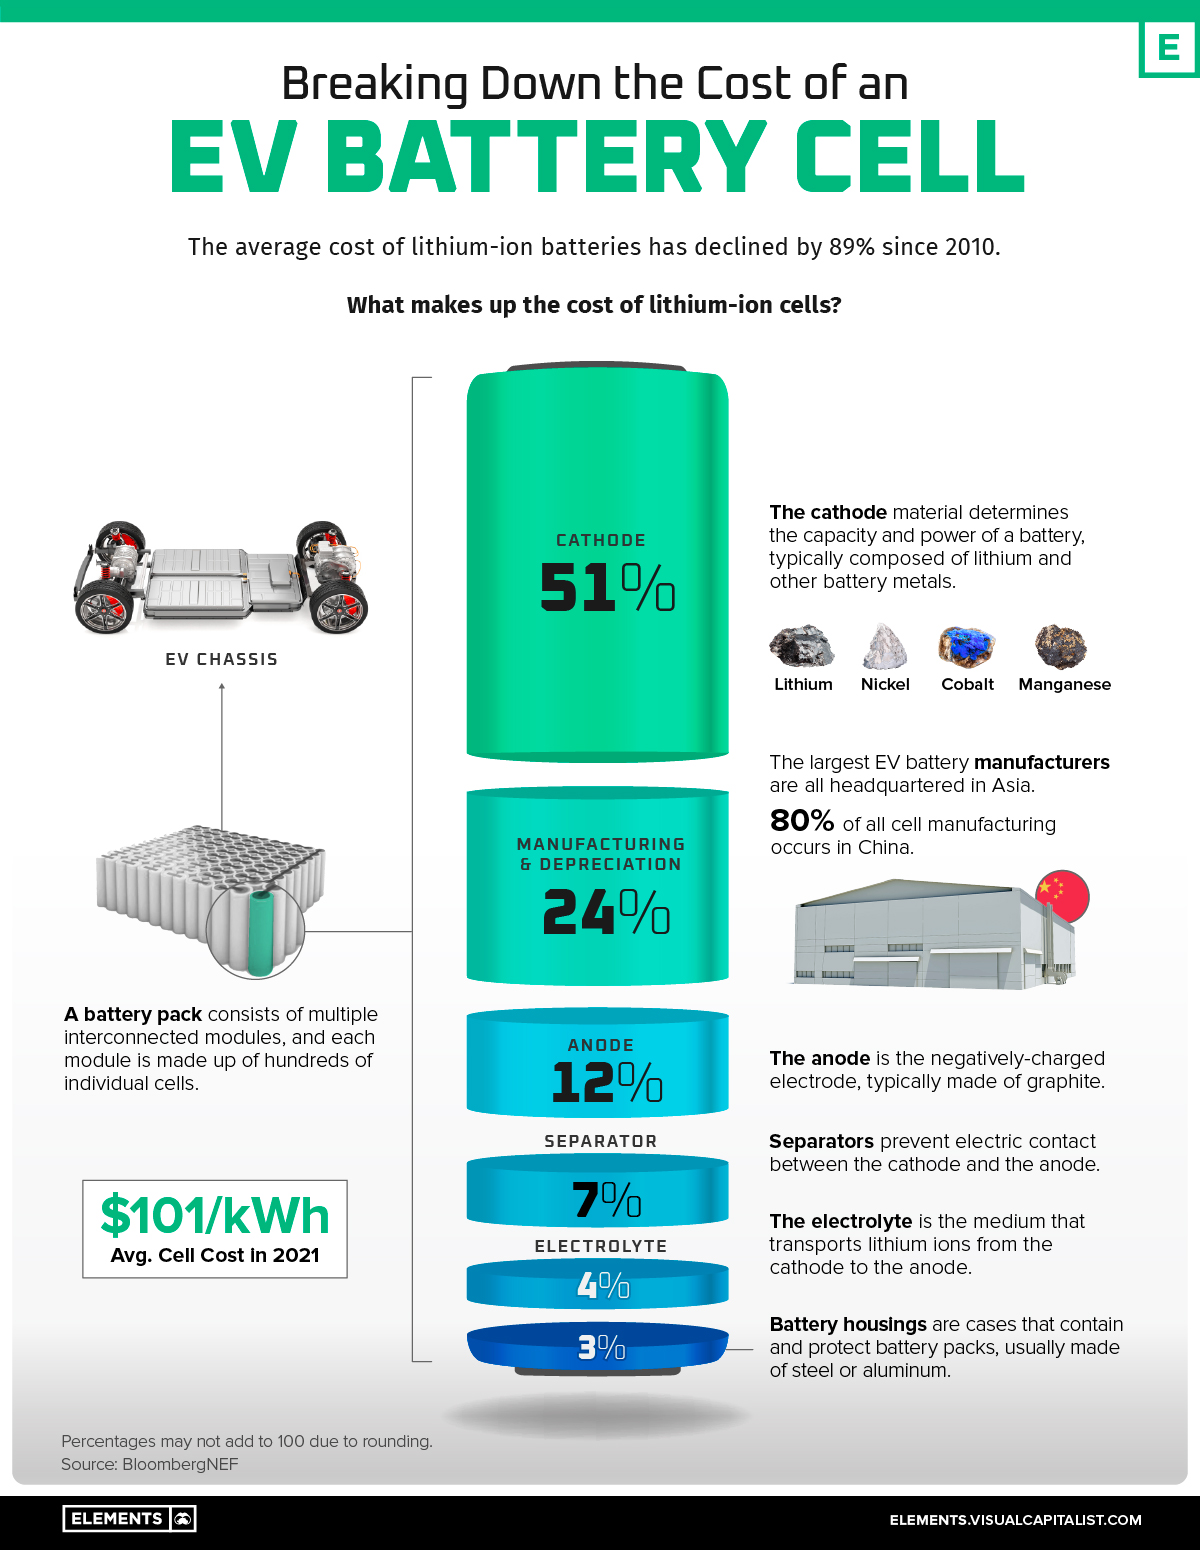 Cost of a lithium-ion battery cell